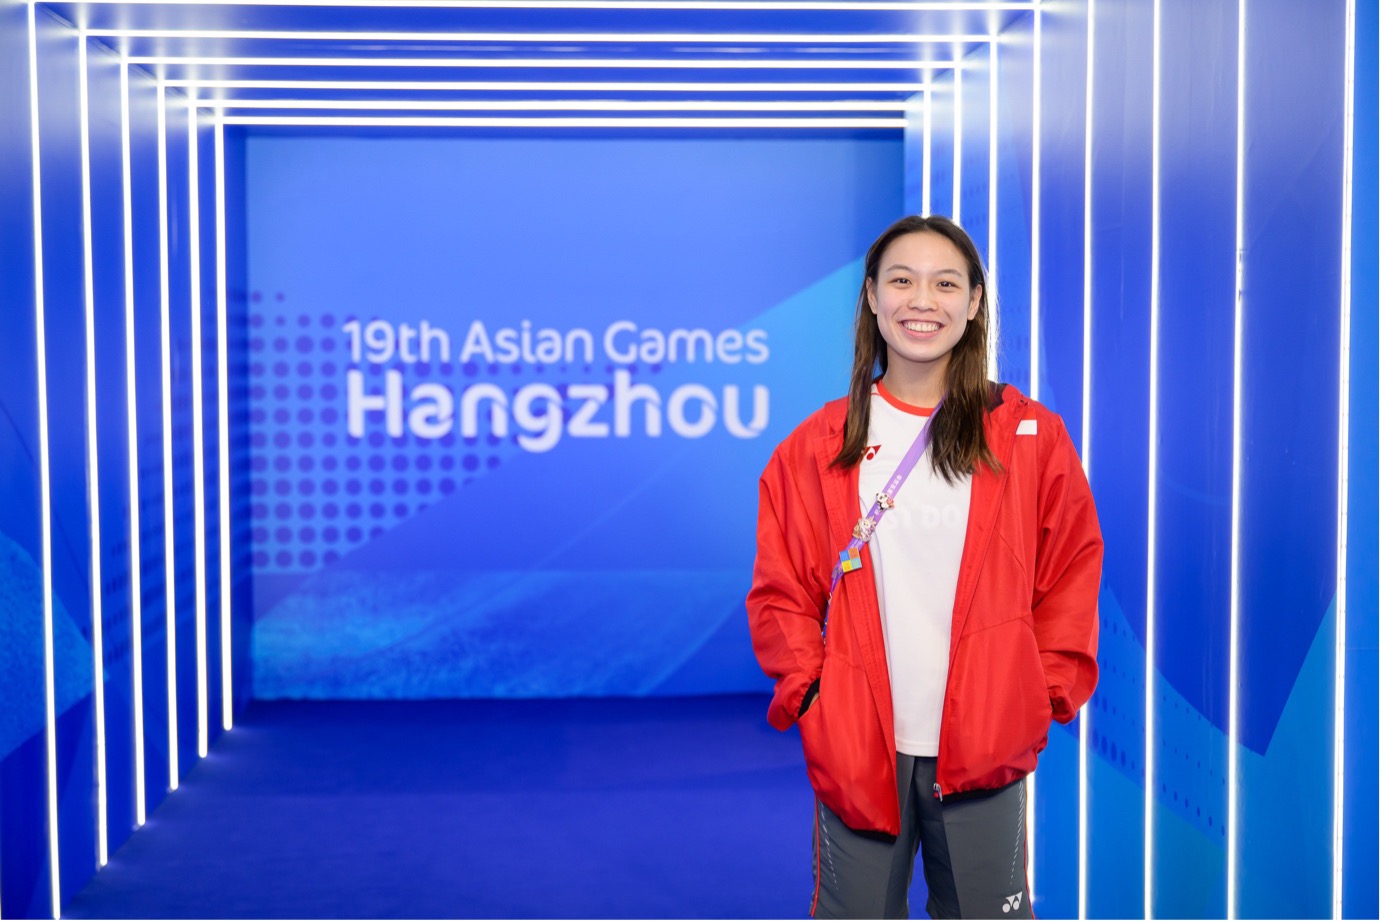 Ashlee Tan Yi Xuan is National Diving Athlete from the Yong Loo Lin School of Medicine – She is a Multi-SEA Games and Silver FINA Diving Grand Prix Medallist, and has recently represented Singapore at the 19th Asian Games in Hangzhou.
